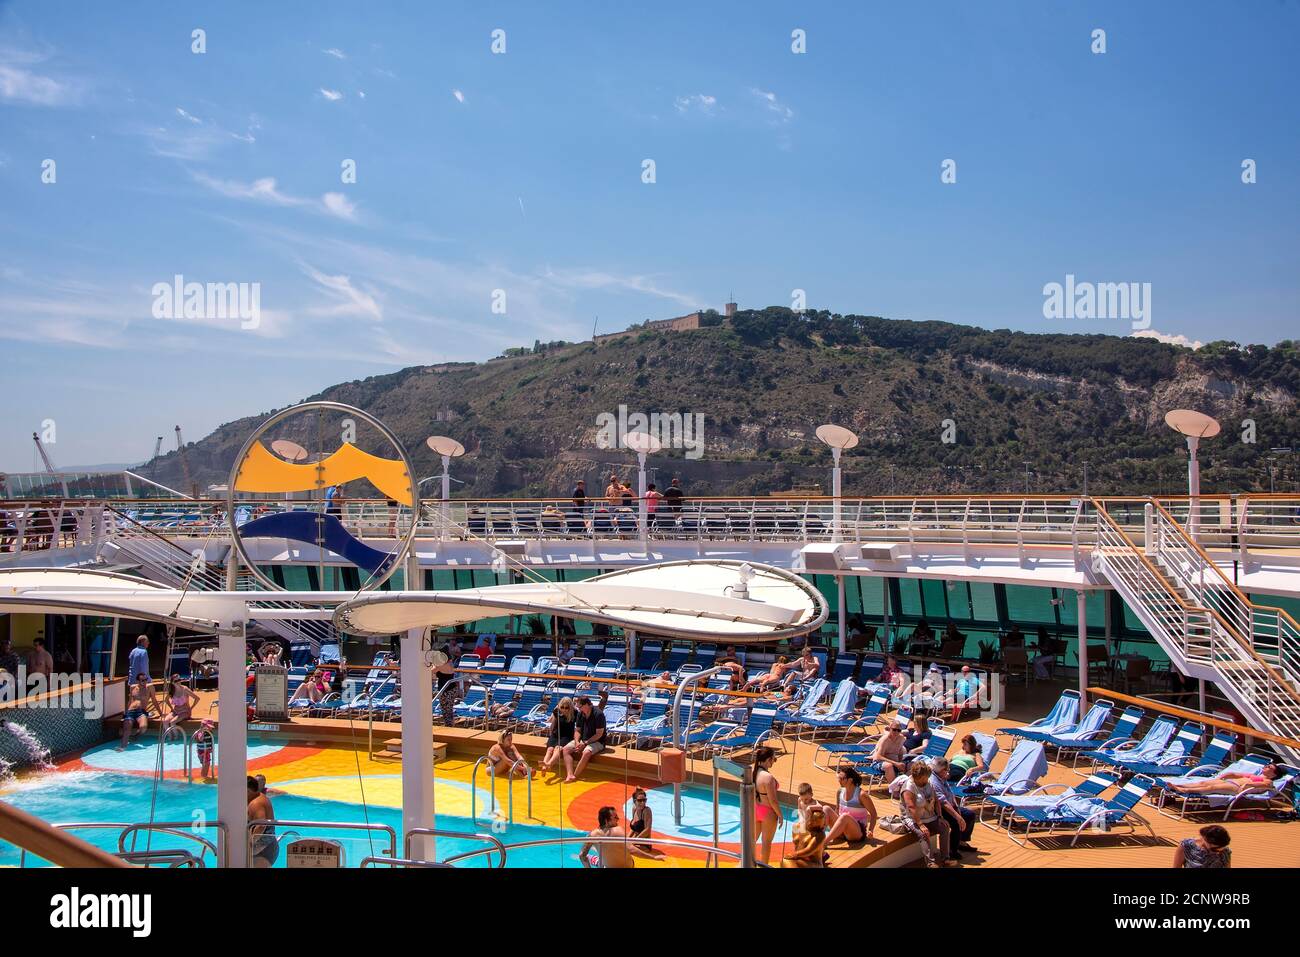 Barcelona, Spain - June 7, 2016:  The Lido and pool deck aboard the Brilliance of the Seas cruise ship, part of the  Royal Caribbean cruise line. Stock Photo